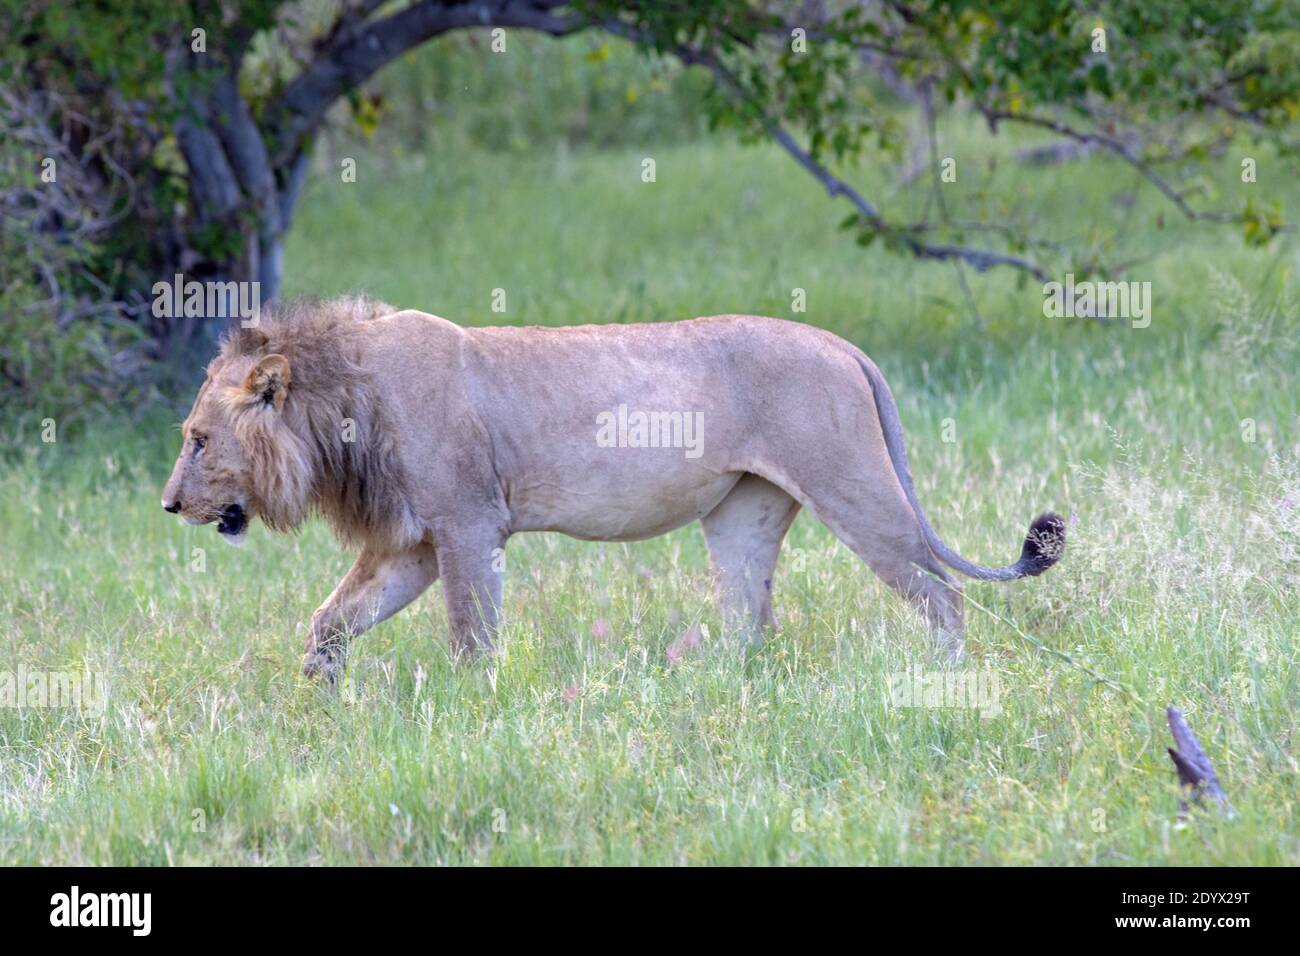 African Lion (Panthera leo). Profile of an Adult male, walking amongst grassland vegetation. Bulging belly indicative of having a recent meal. Green c Stock Photo